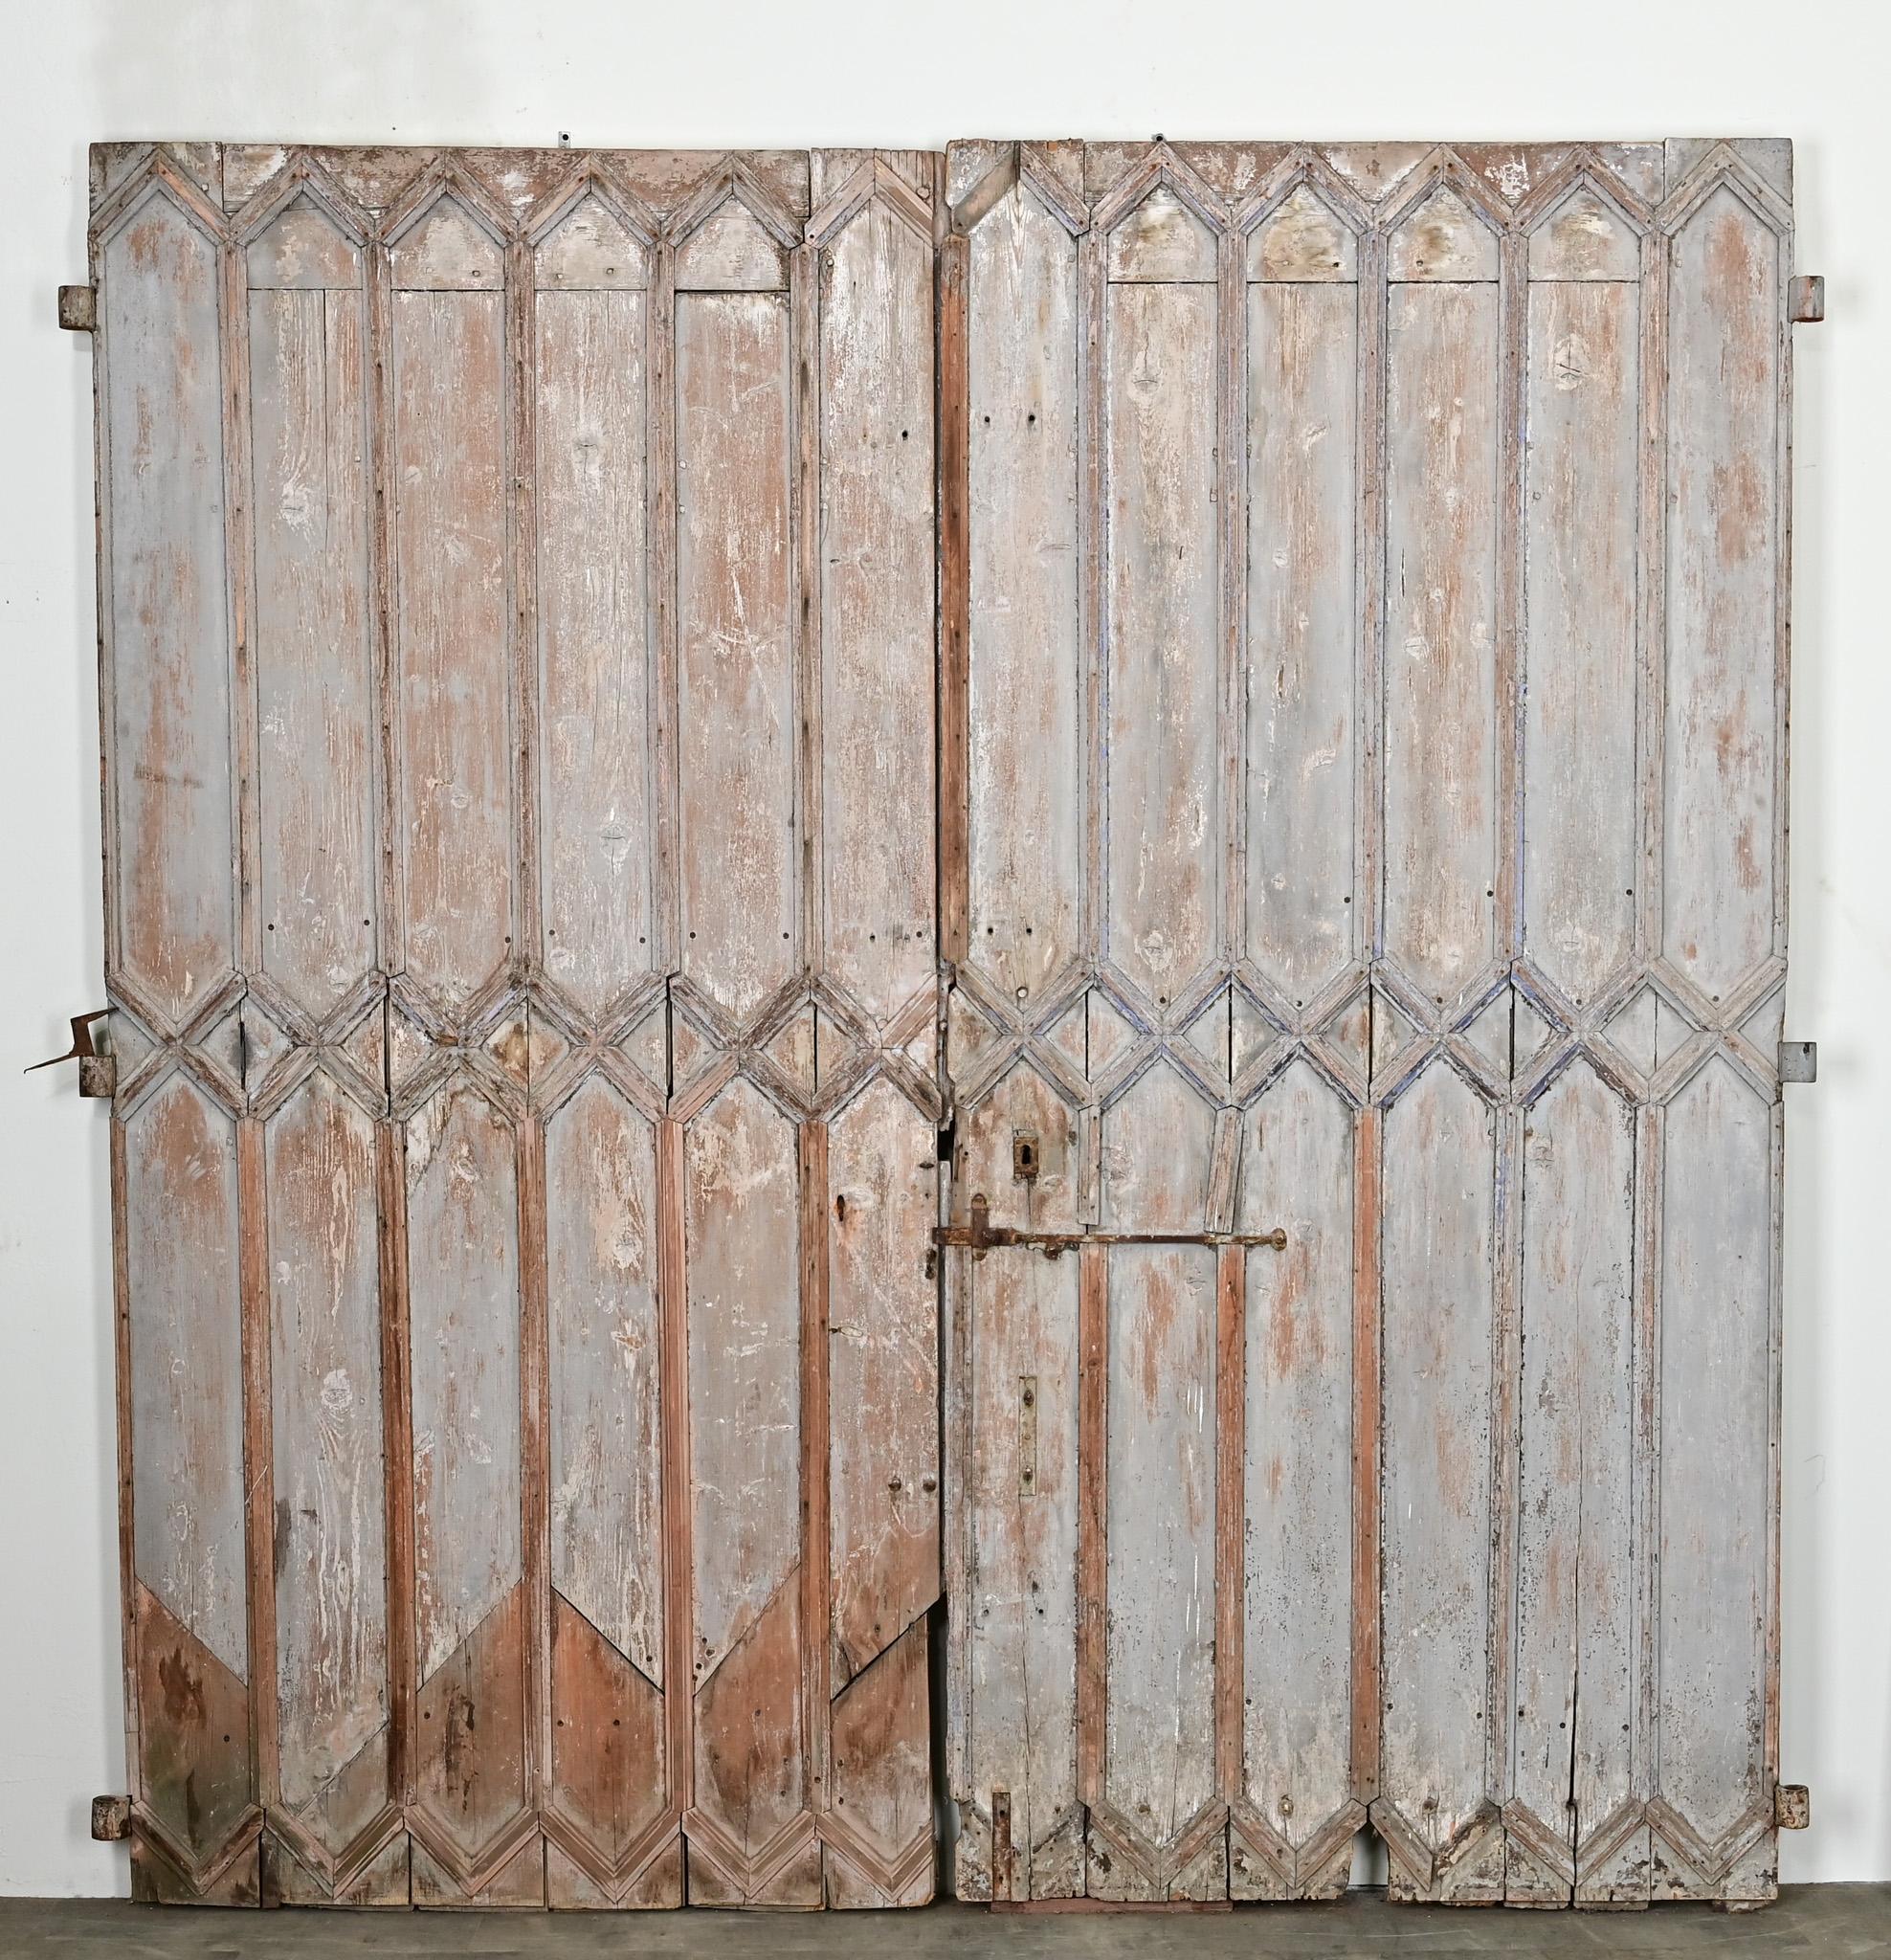 A large set of French wooden entry doors with its original worn painted finish. The doors make a statement and are made of solid wood with wooden geometric moldings. Original forged iron hardware is found throughout. Be sure to view the detailed